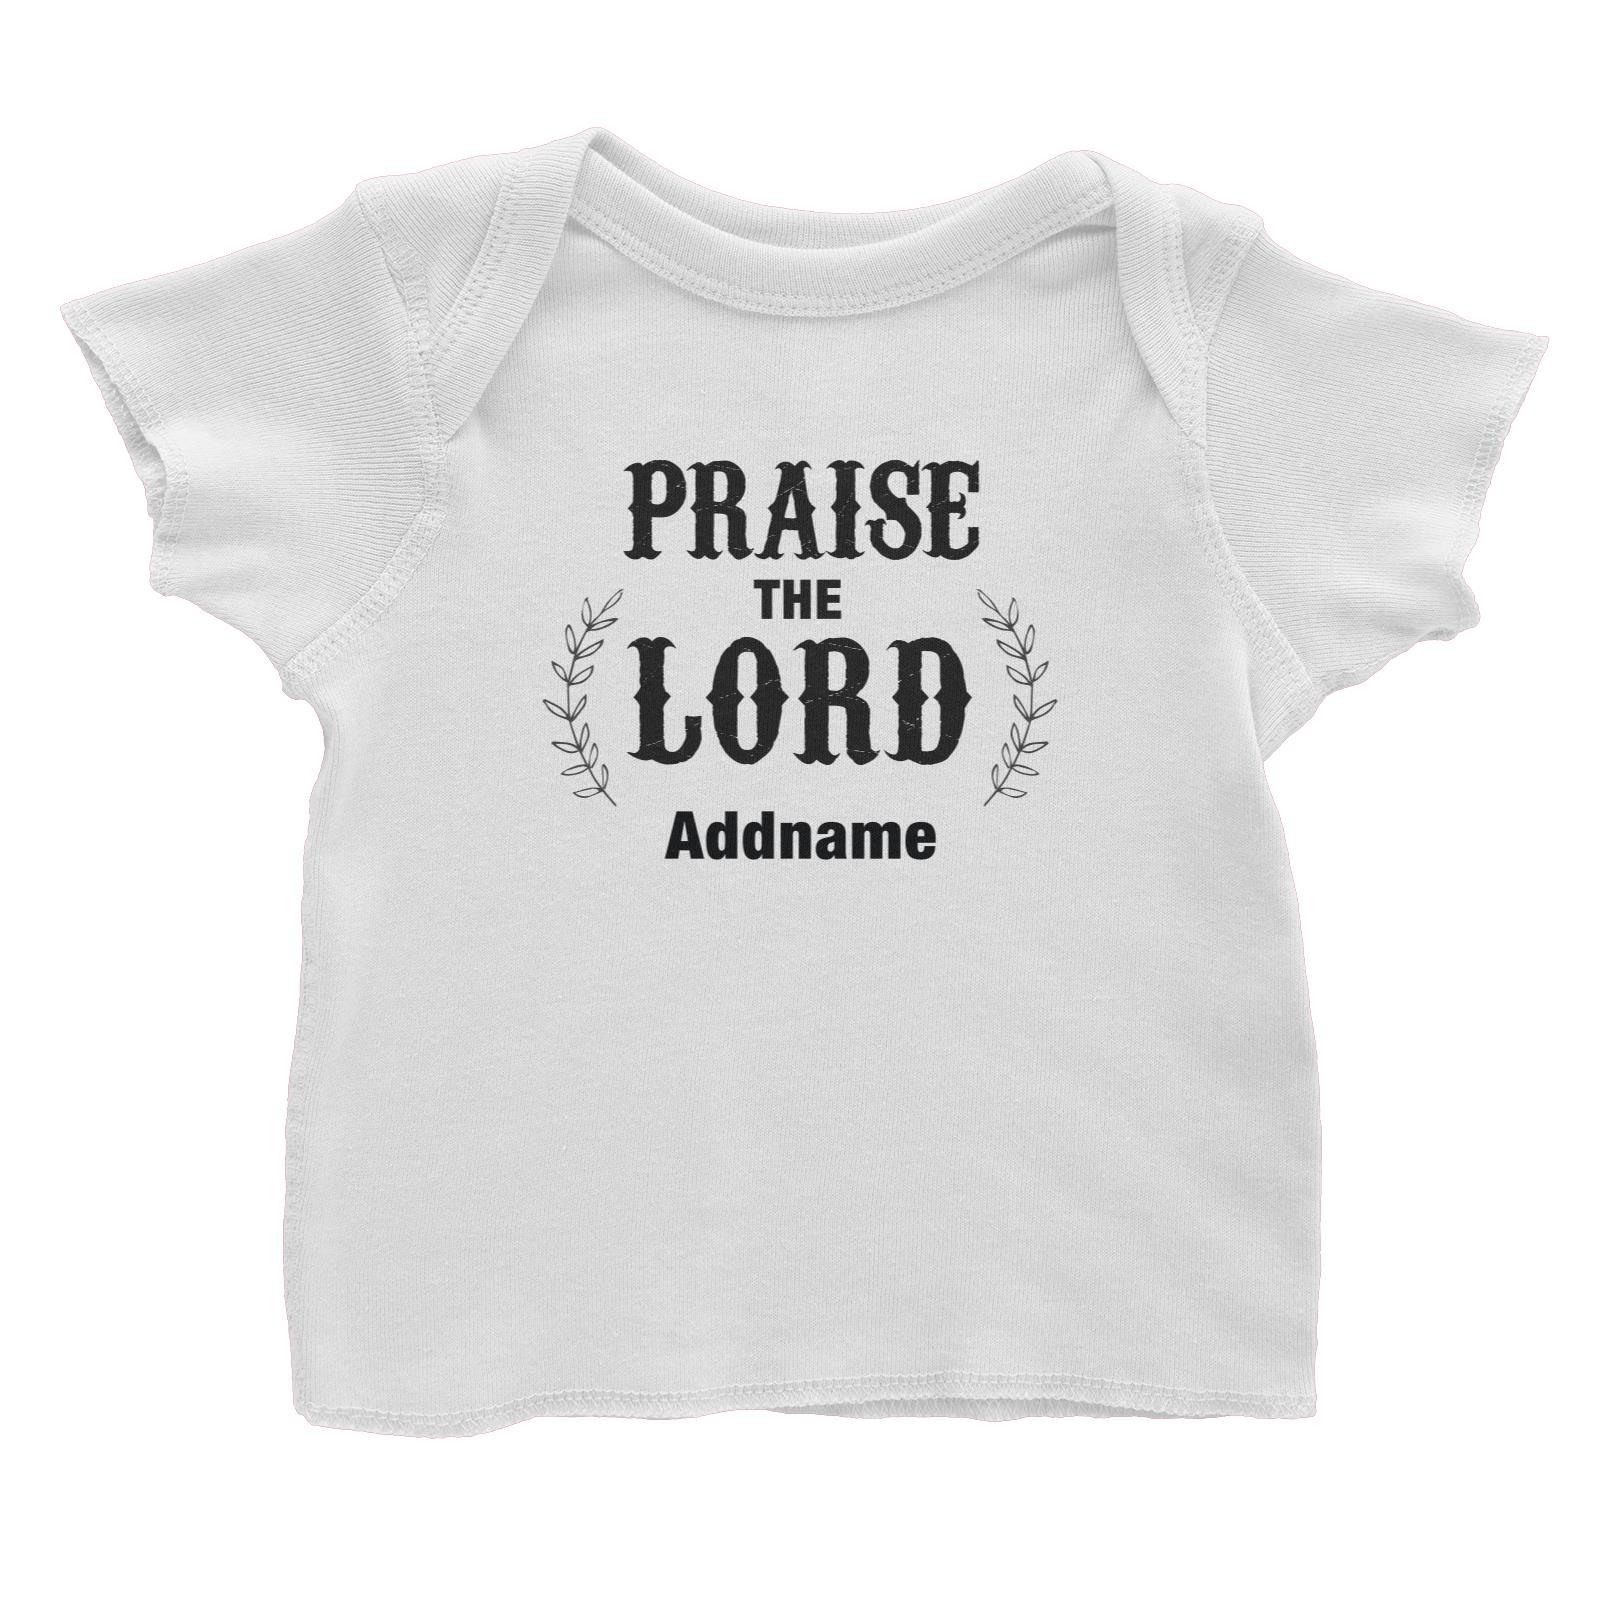 Christian Series Praise The Lord Addname Baby T-Shirt